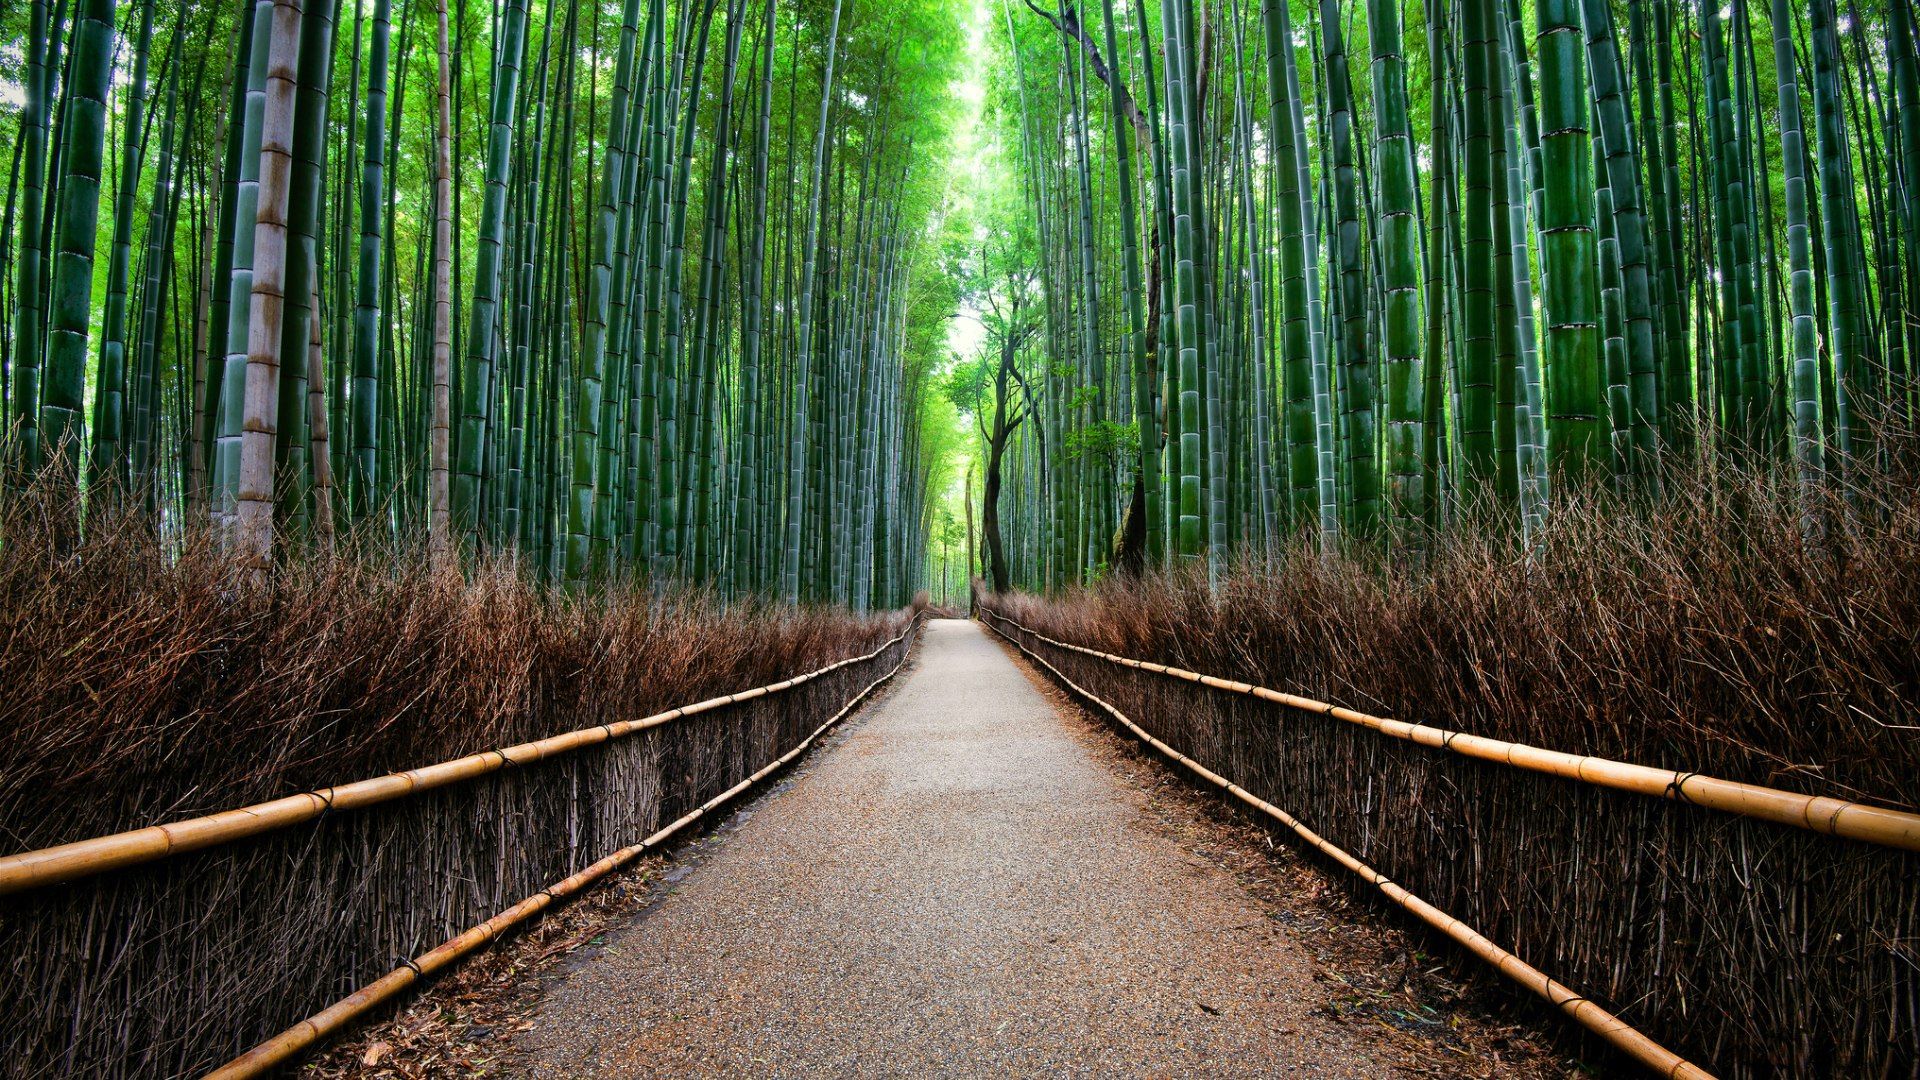 1920x1080 Sagano Bamboo Forest in Kyoto, Japan wallpaper and image on Wallp...